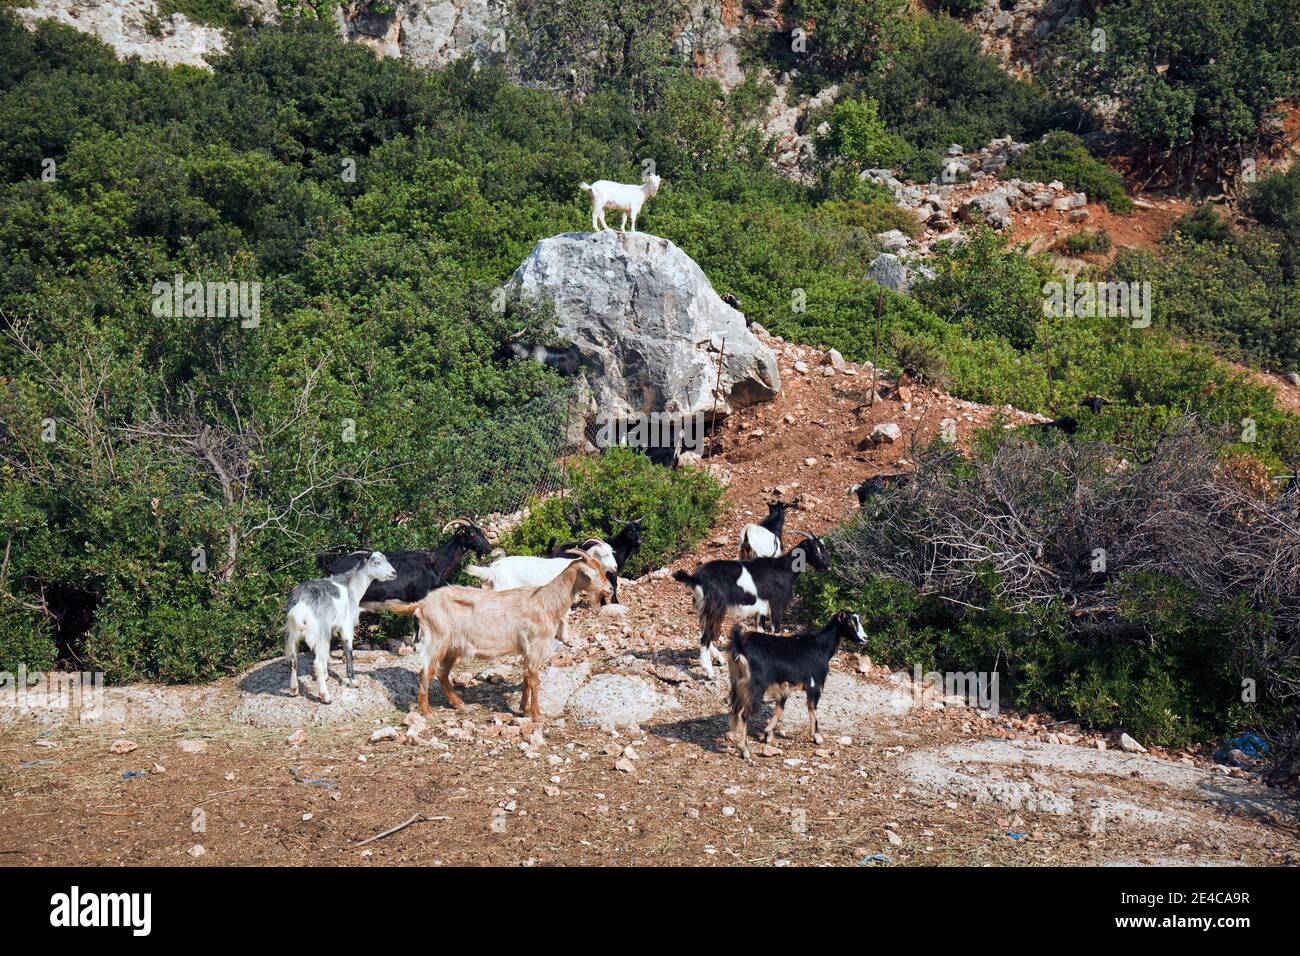 Herd of goats in the maquis with a guard on the boulder, Central Greece Stock Photo